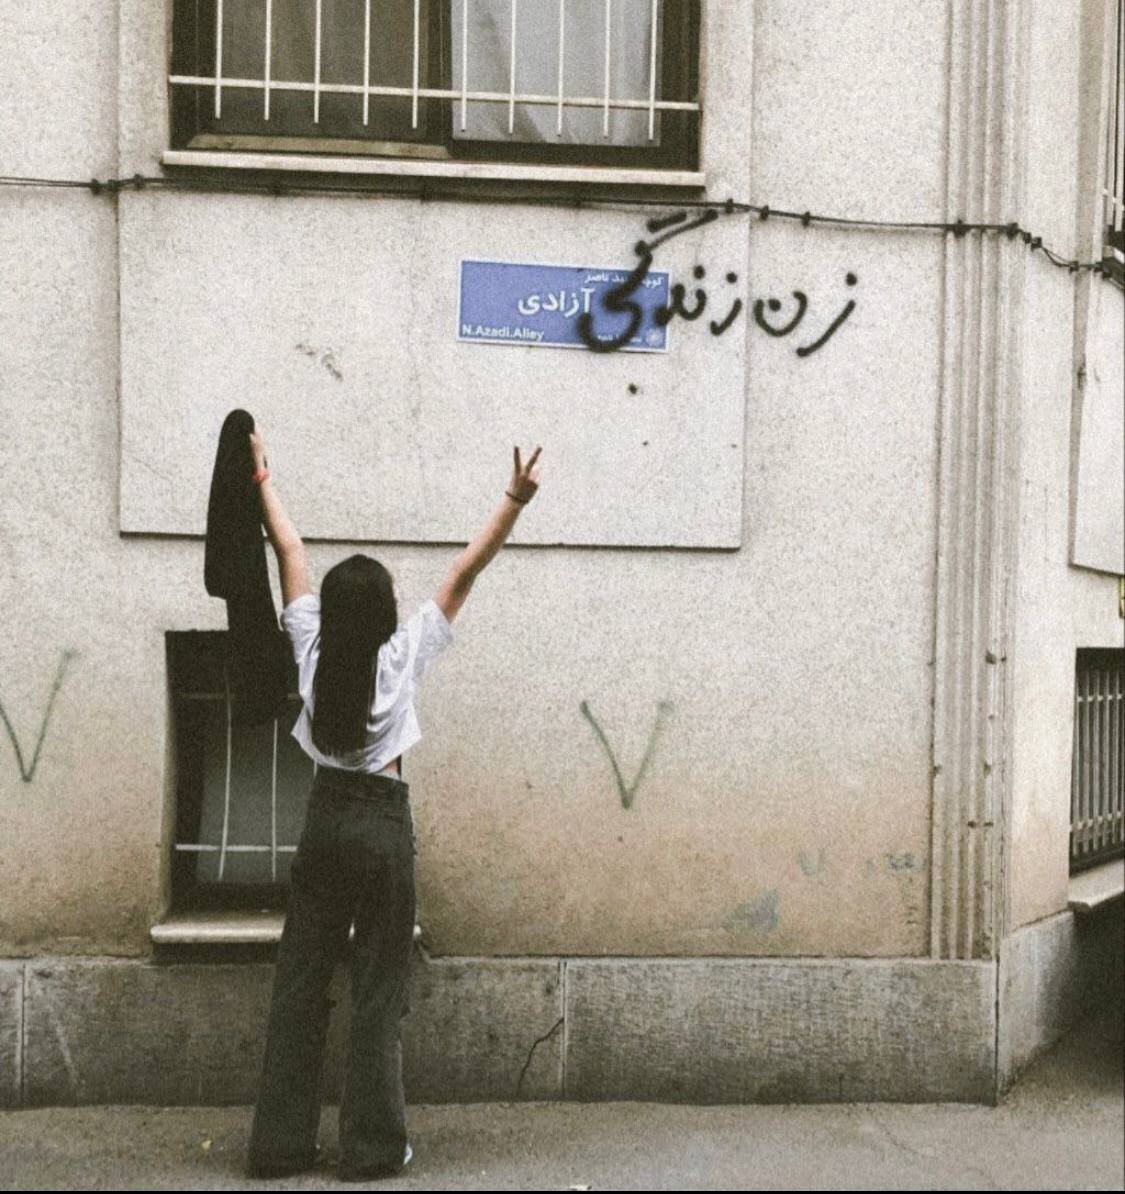 A young Iranian woman without a hijab sprays the words 'woman' and 'life' before a sign for 'azadi' [freedom] alleyway in Tehran to make the slogan 'woman, life, freedom'. 📸 via @Vahid #مهسا_امینی